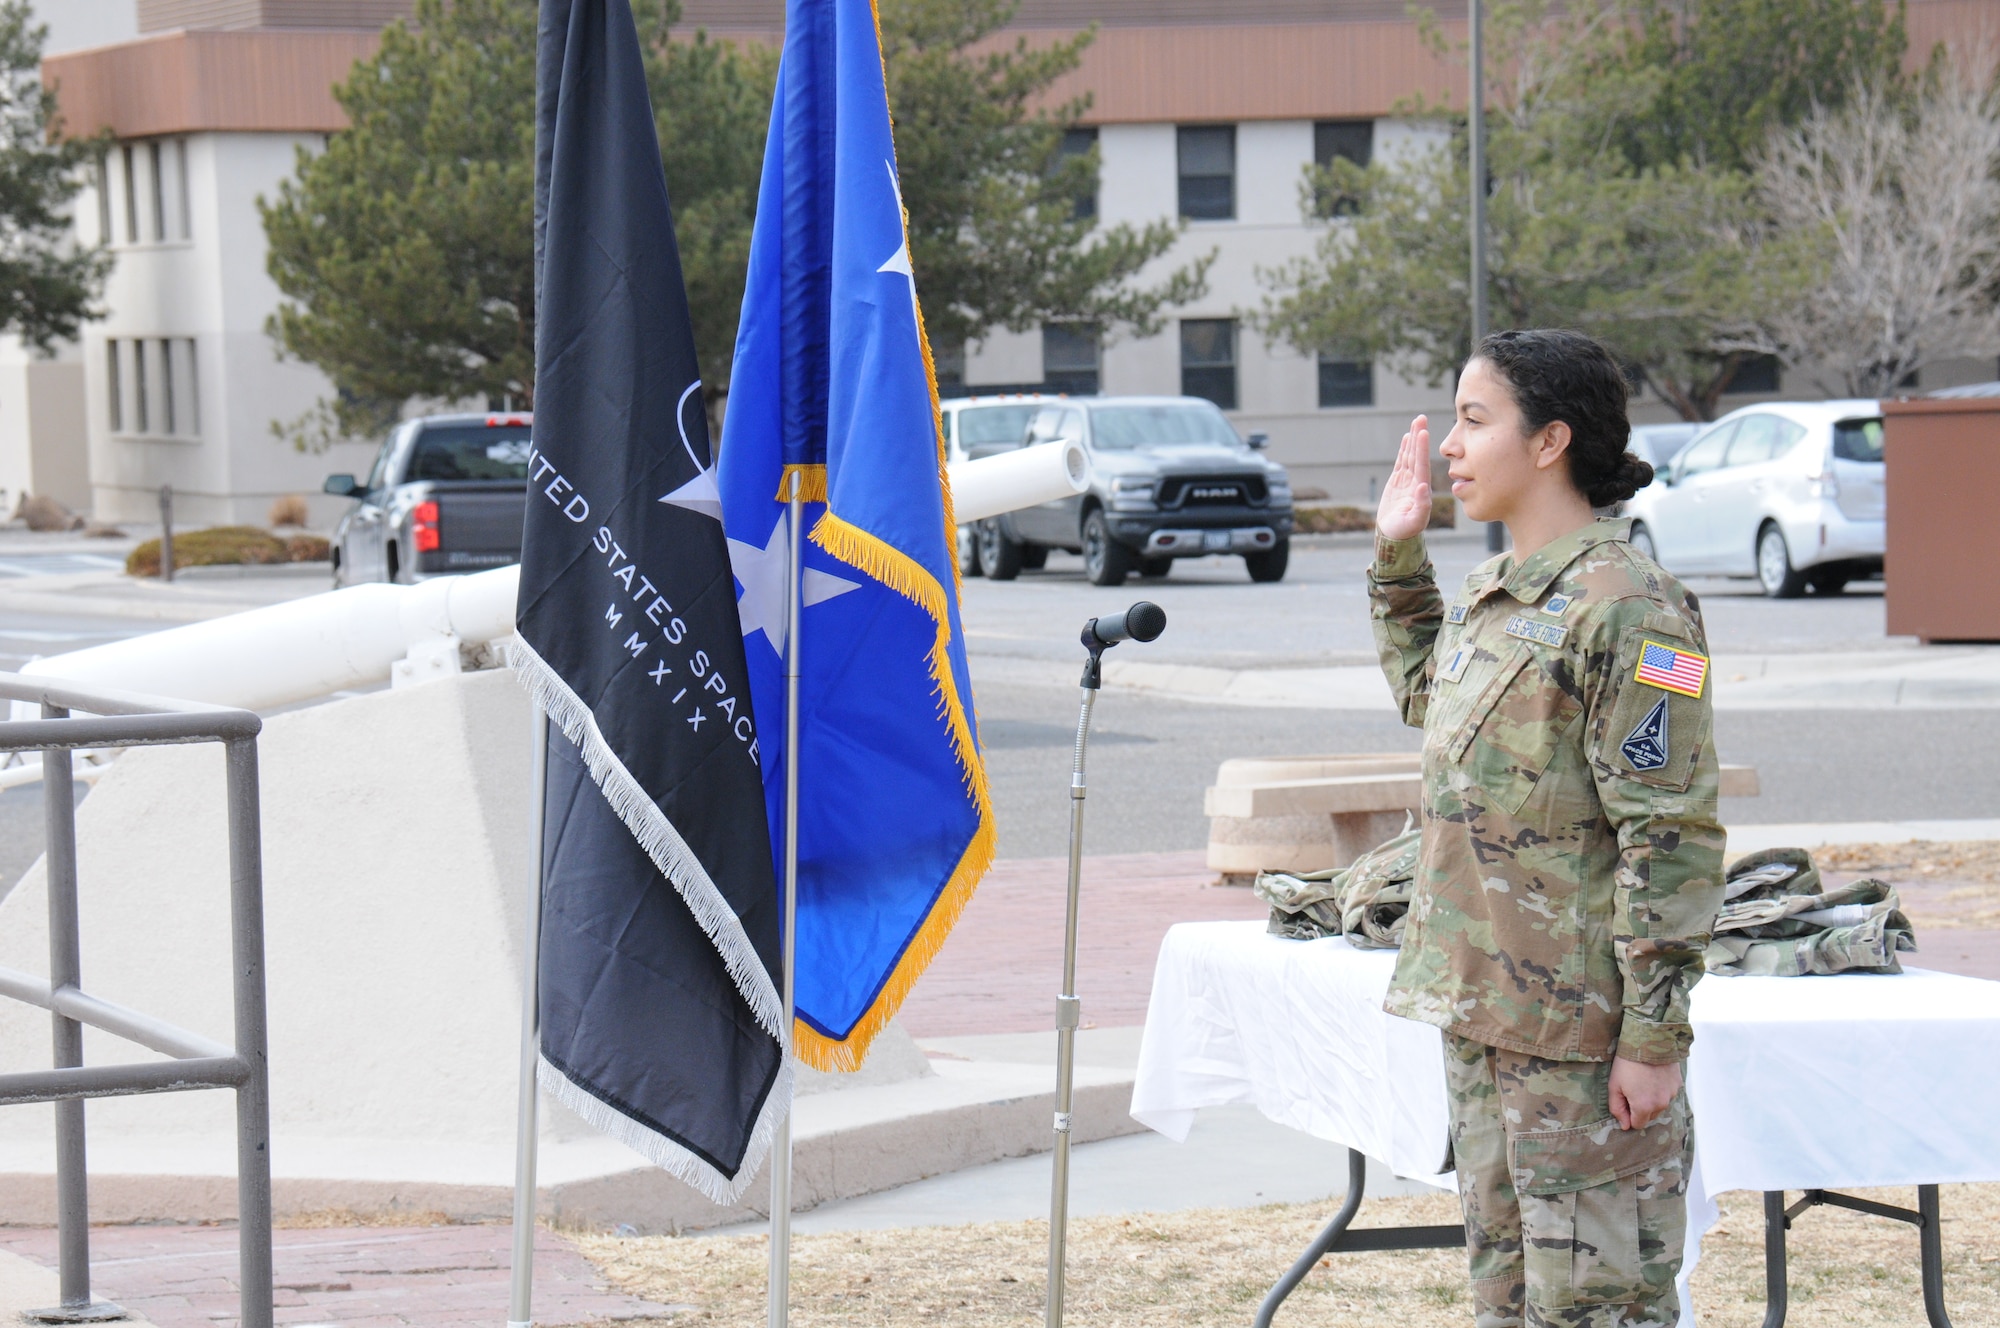 Air Force Research Laboratory engineer 1st Lt. Kyra Schmidt takes an oath of office in a ceremony held at Kirtland AFB, N.M. on Feb. 1 in which 13 AFRL officers transferred from the U.S. Air Force to the U.S. Space Force. (U.S. Air Force photo/John Michael Cochran)